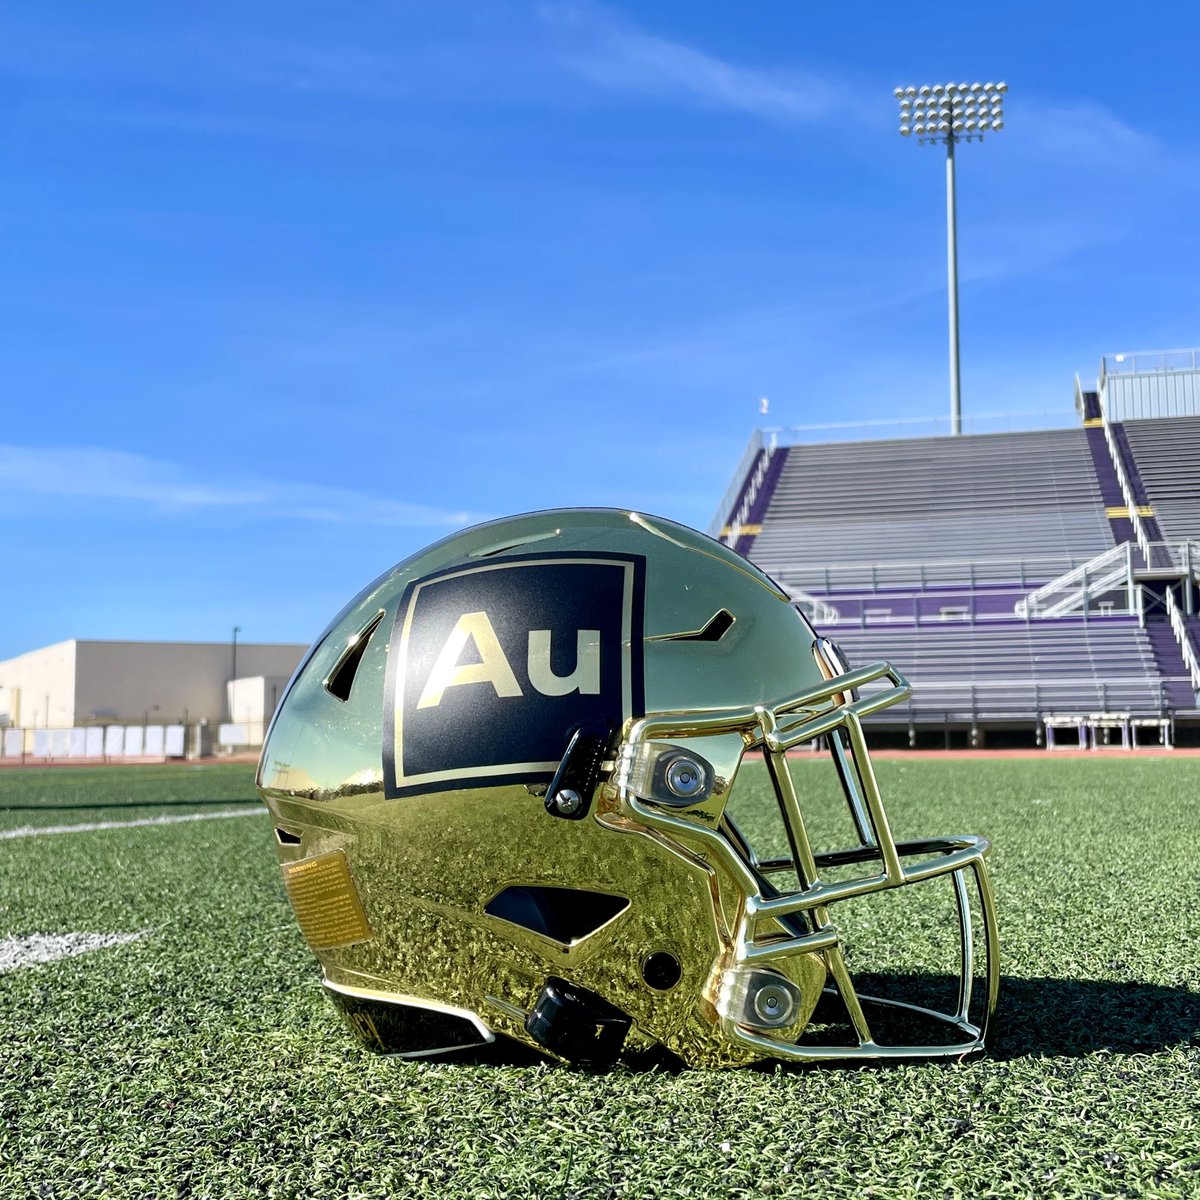 Thinking about ordering decals? We have a 6-8 day production time right now, which means there’s plenty of time to get game-stopping decals for your winning season look. Get started with a quote request today! #Au #CustomizeYourLegacy